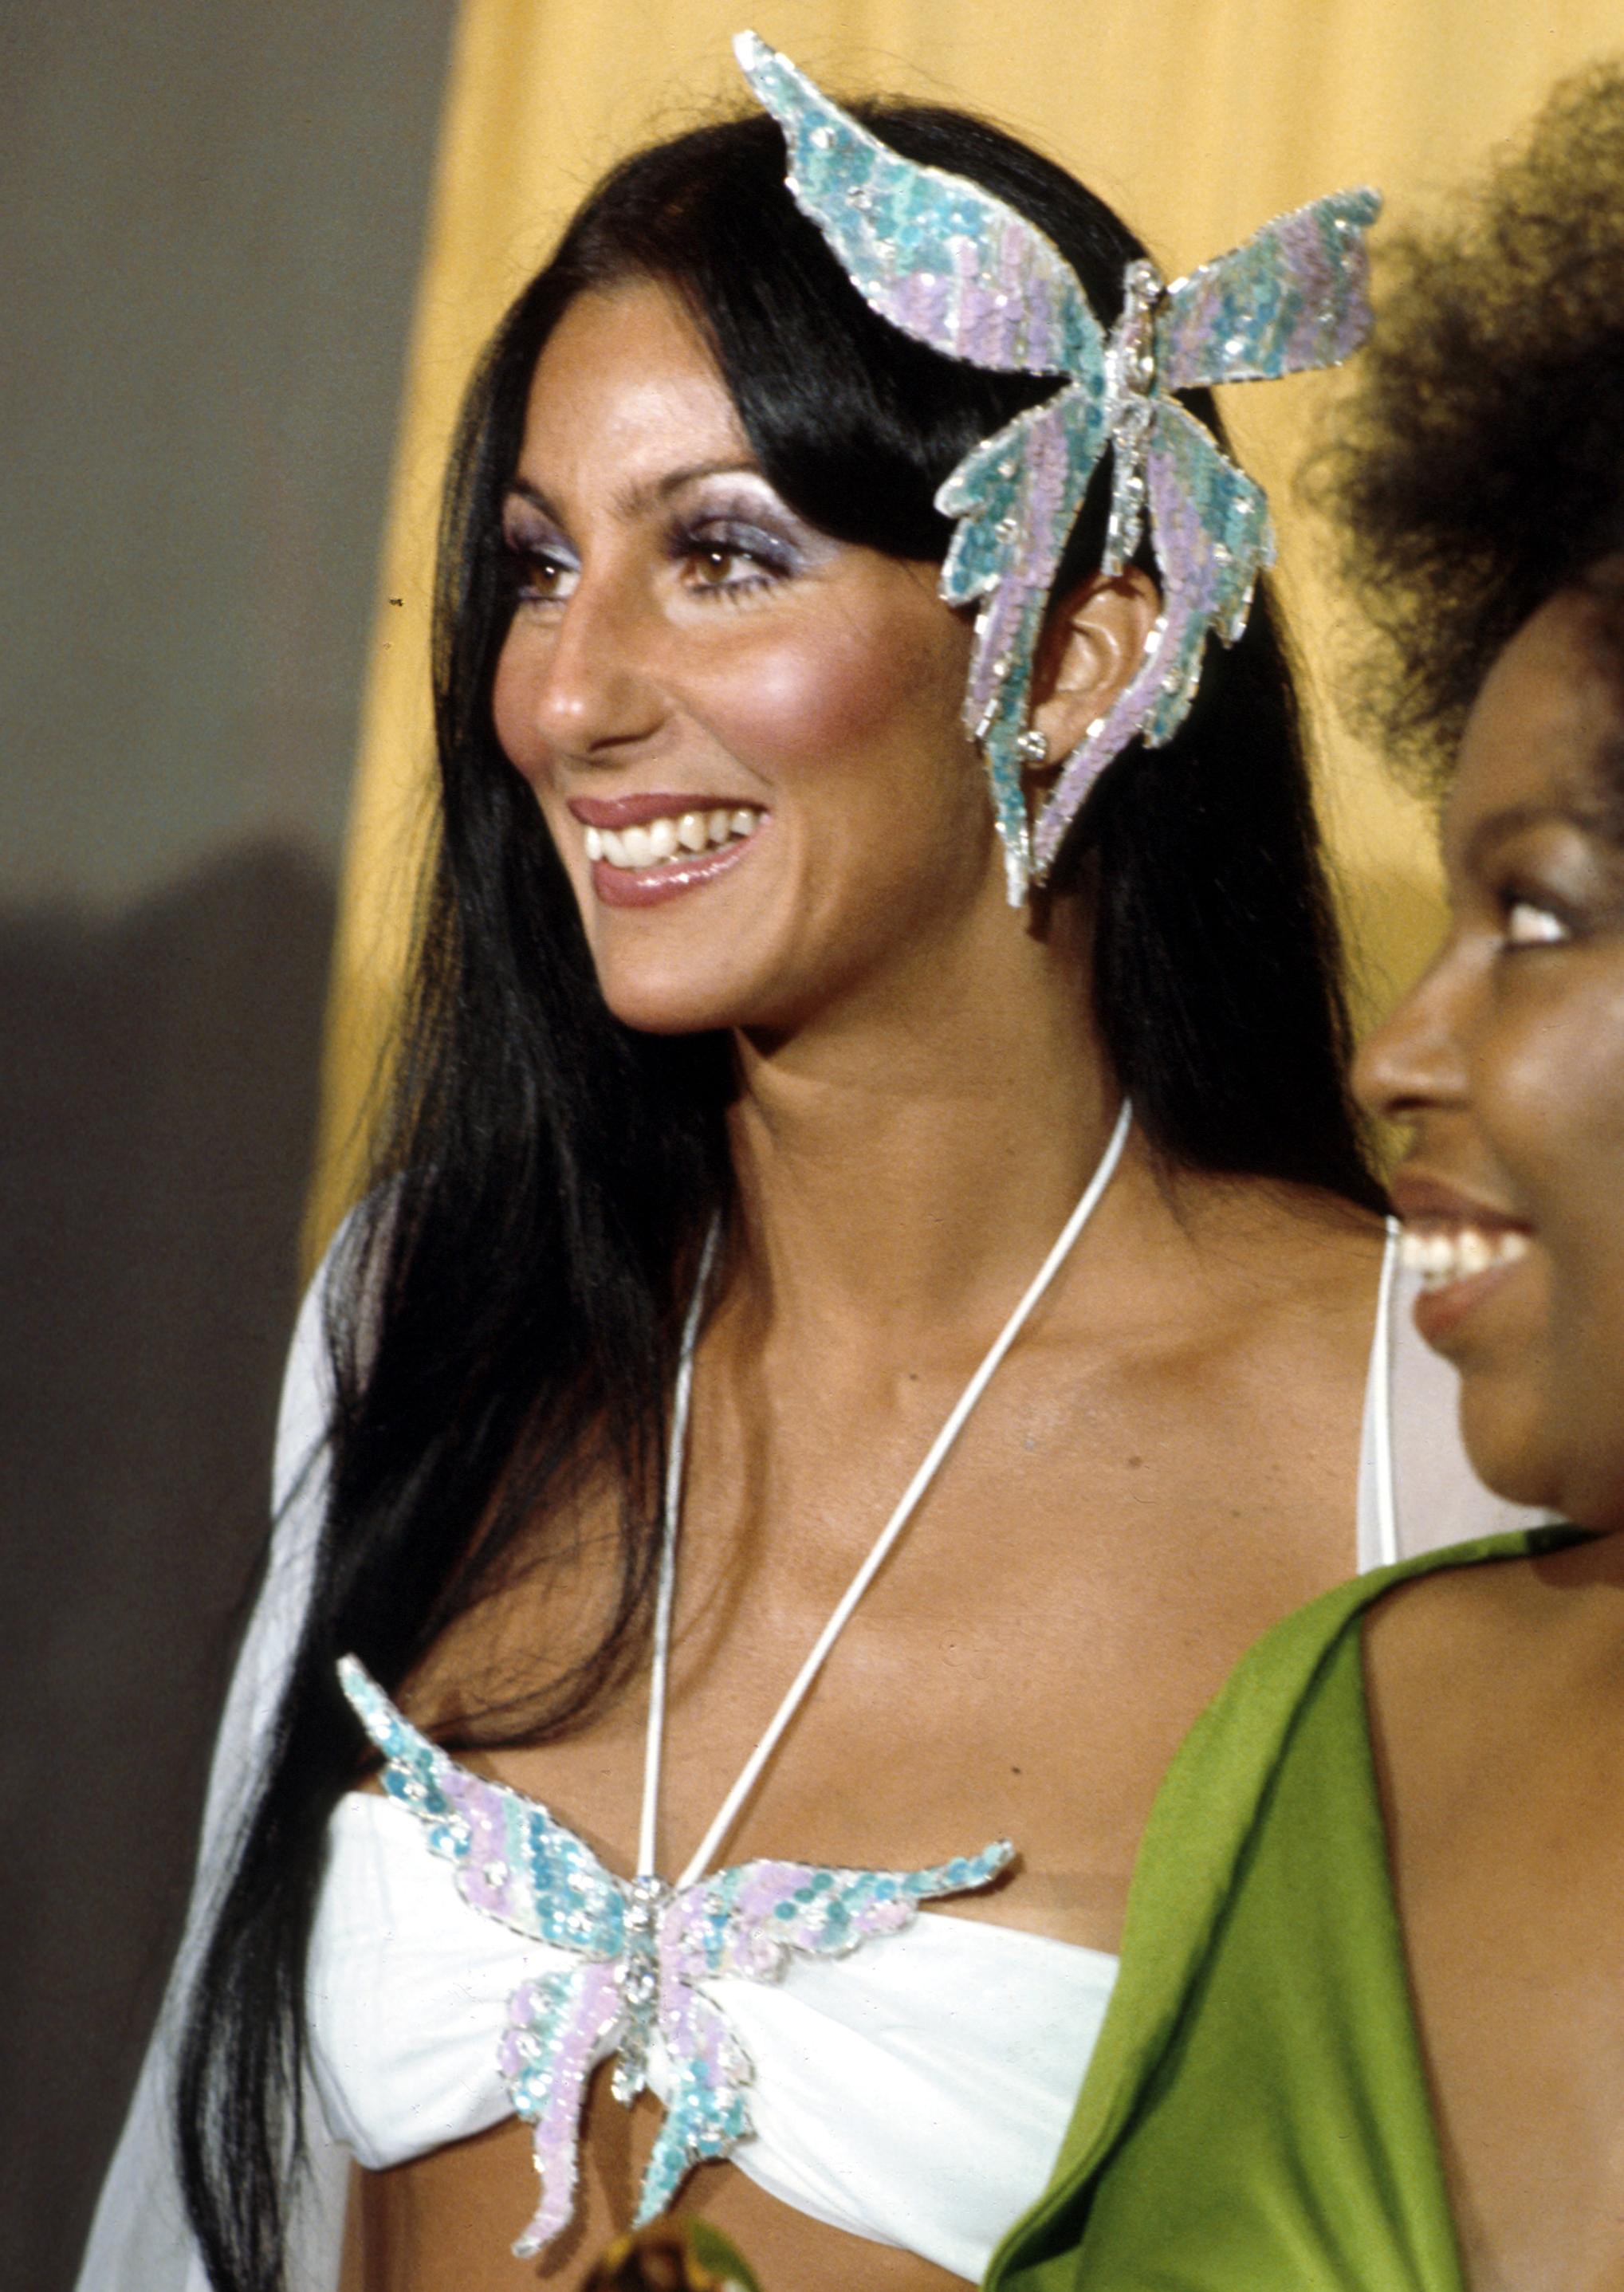 LOS ANGELES - MARCH 2: Entertainer Cher attends the Grammy awards wearing a large butterfly pin in her hair on March 2, 1974 in Los Angeles, California. (Photo by Michael Ochs Archives/Getty Images)  (Foto:  )